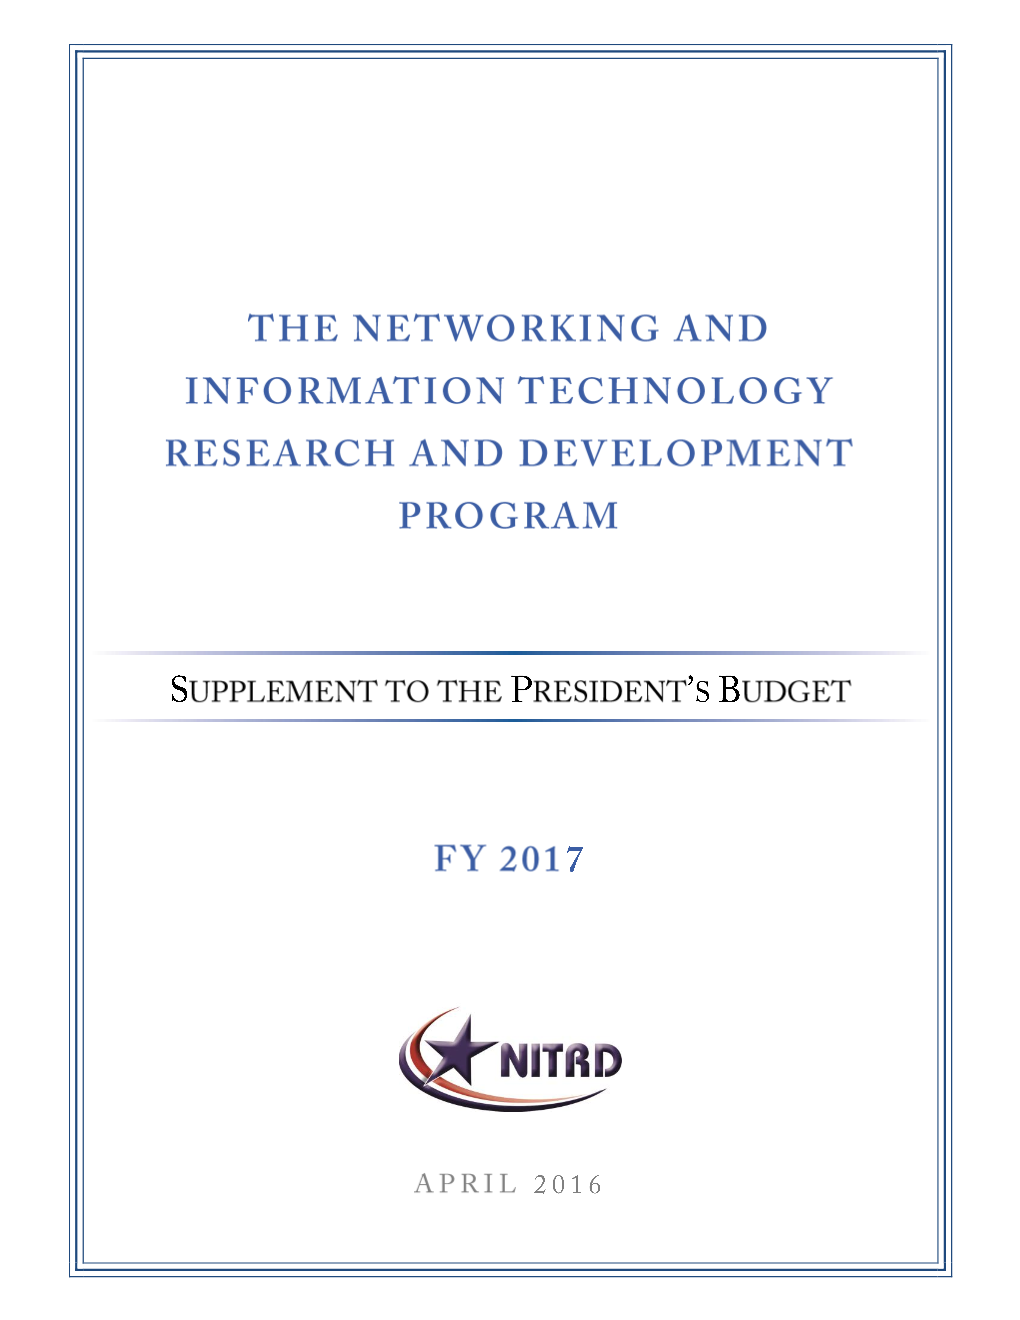 FY 2017 NITRD Supplement to the President's Budget